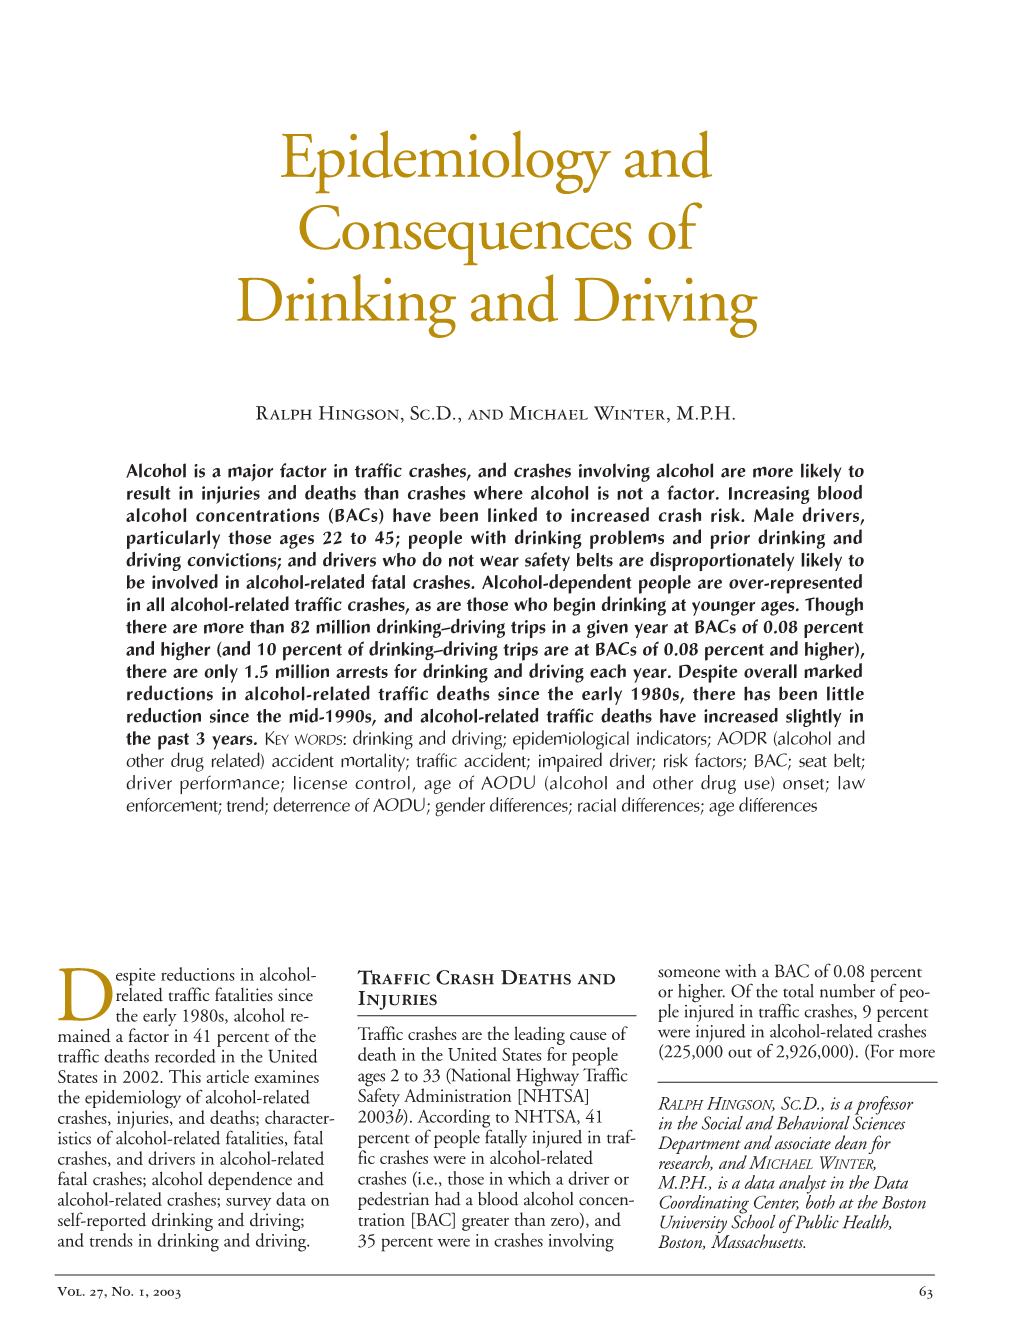 Epidemiology and Consequences of Drinking and Driving